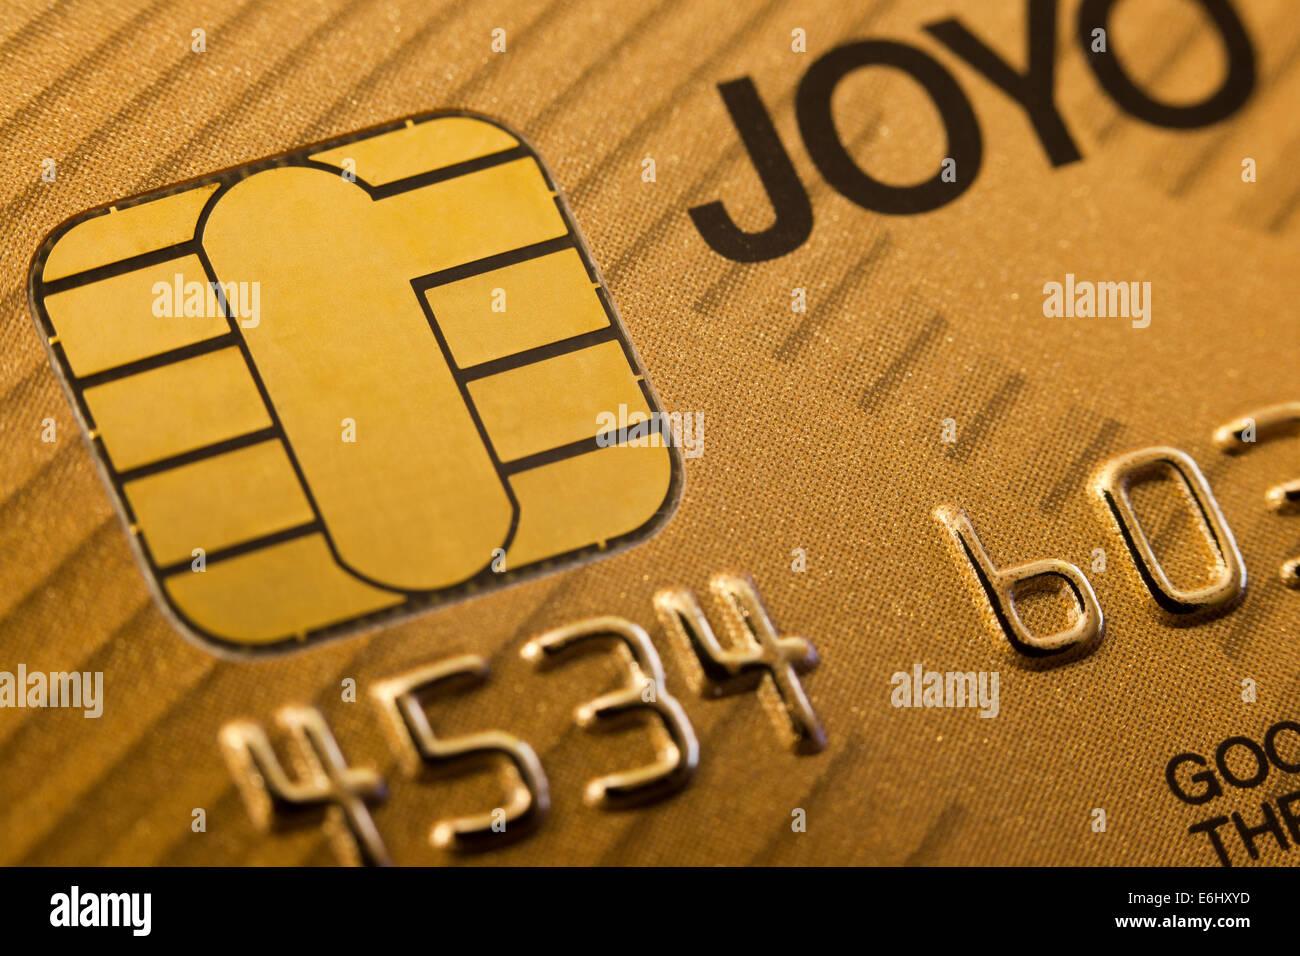 Credit card with smart chip technology Stock Photo